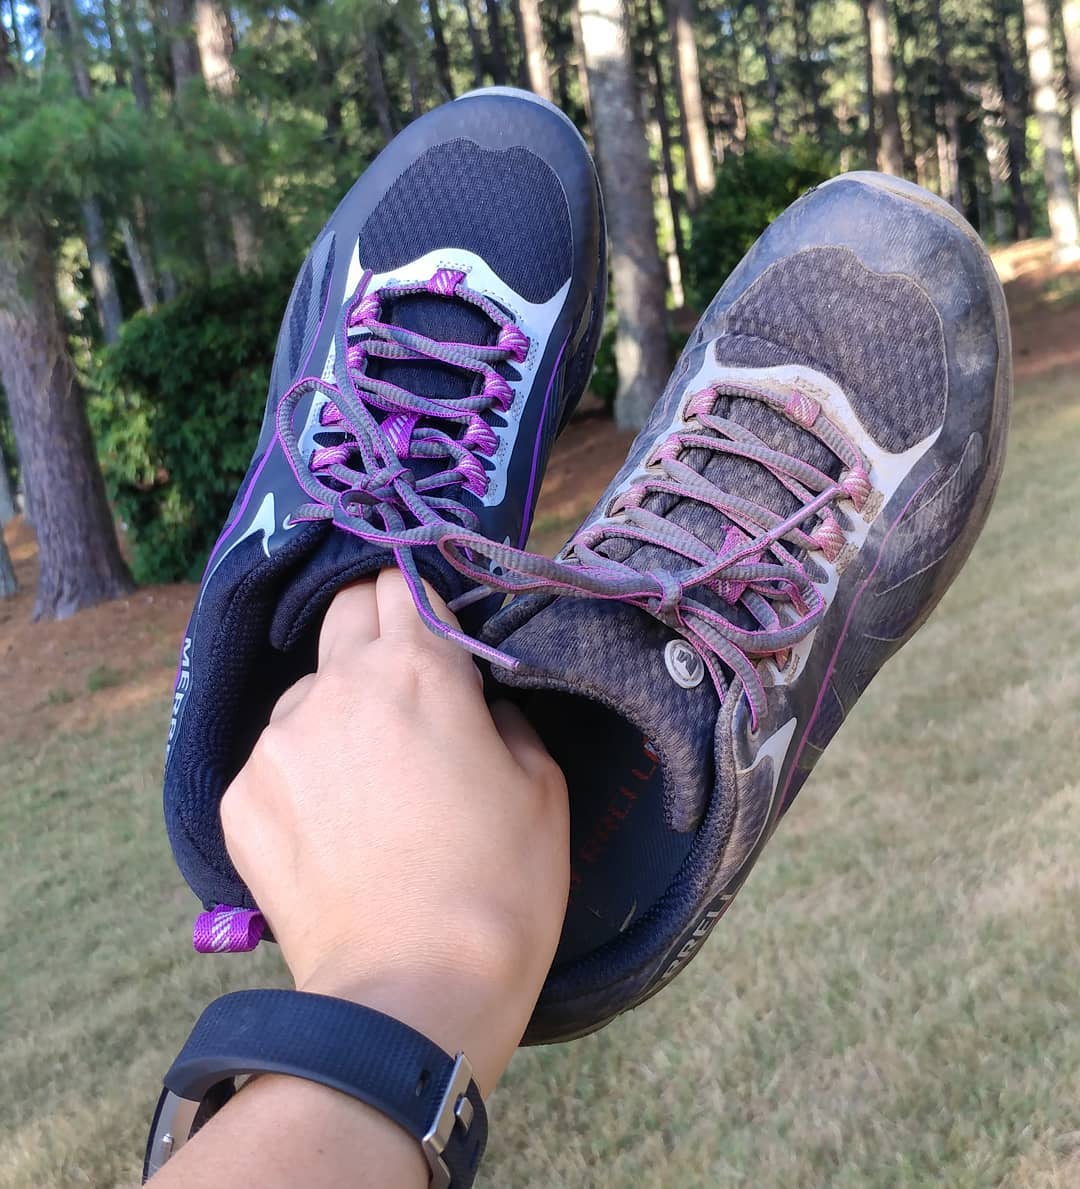 The shoe on the right is exactly one year old. The shoe on the left is a brand new replacement. It's hard to believe these are the same model! Those were some hard miles! Happy hiking!